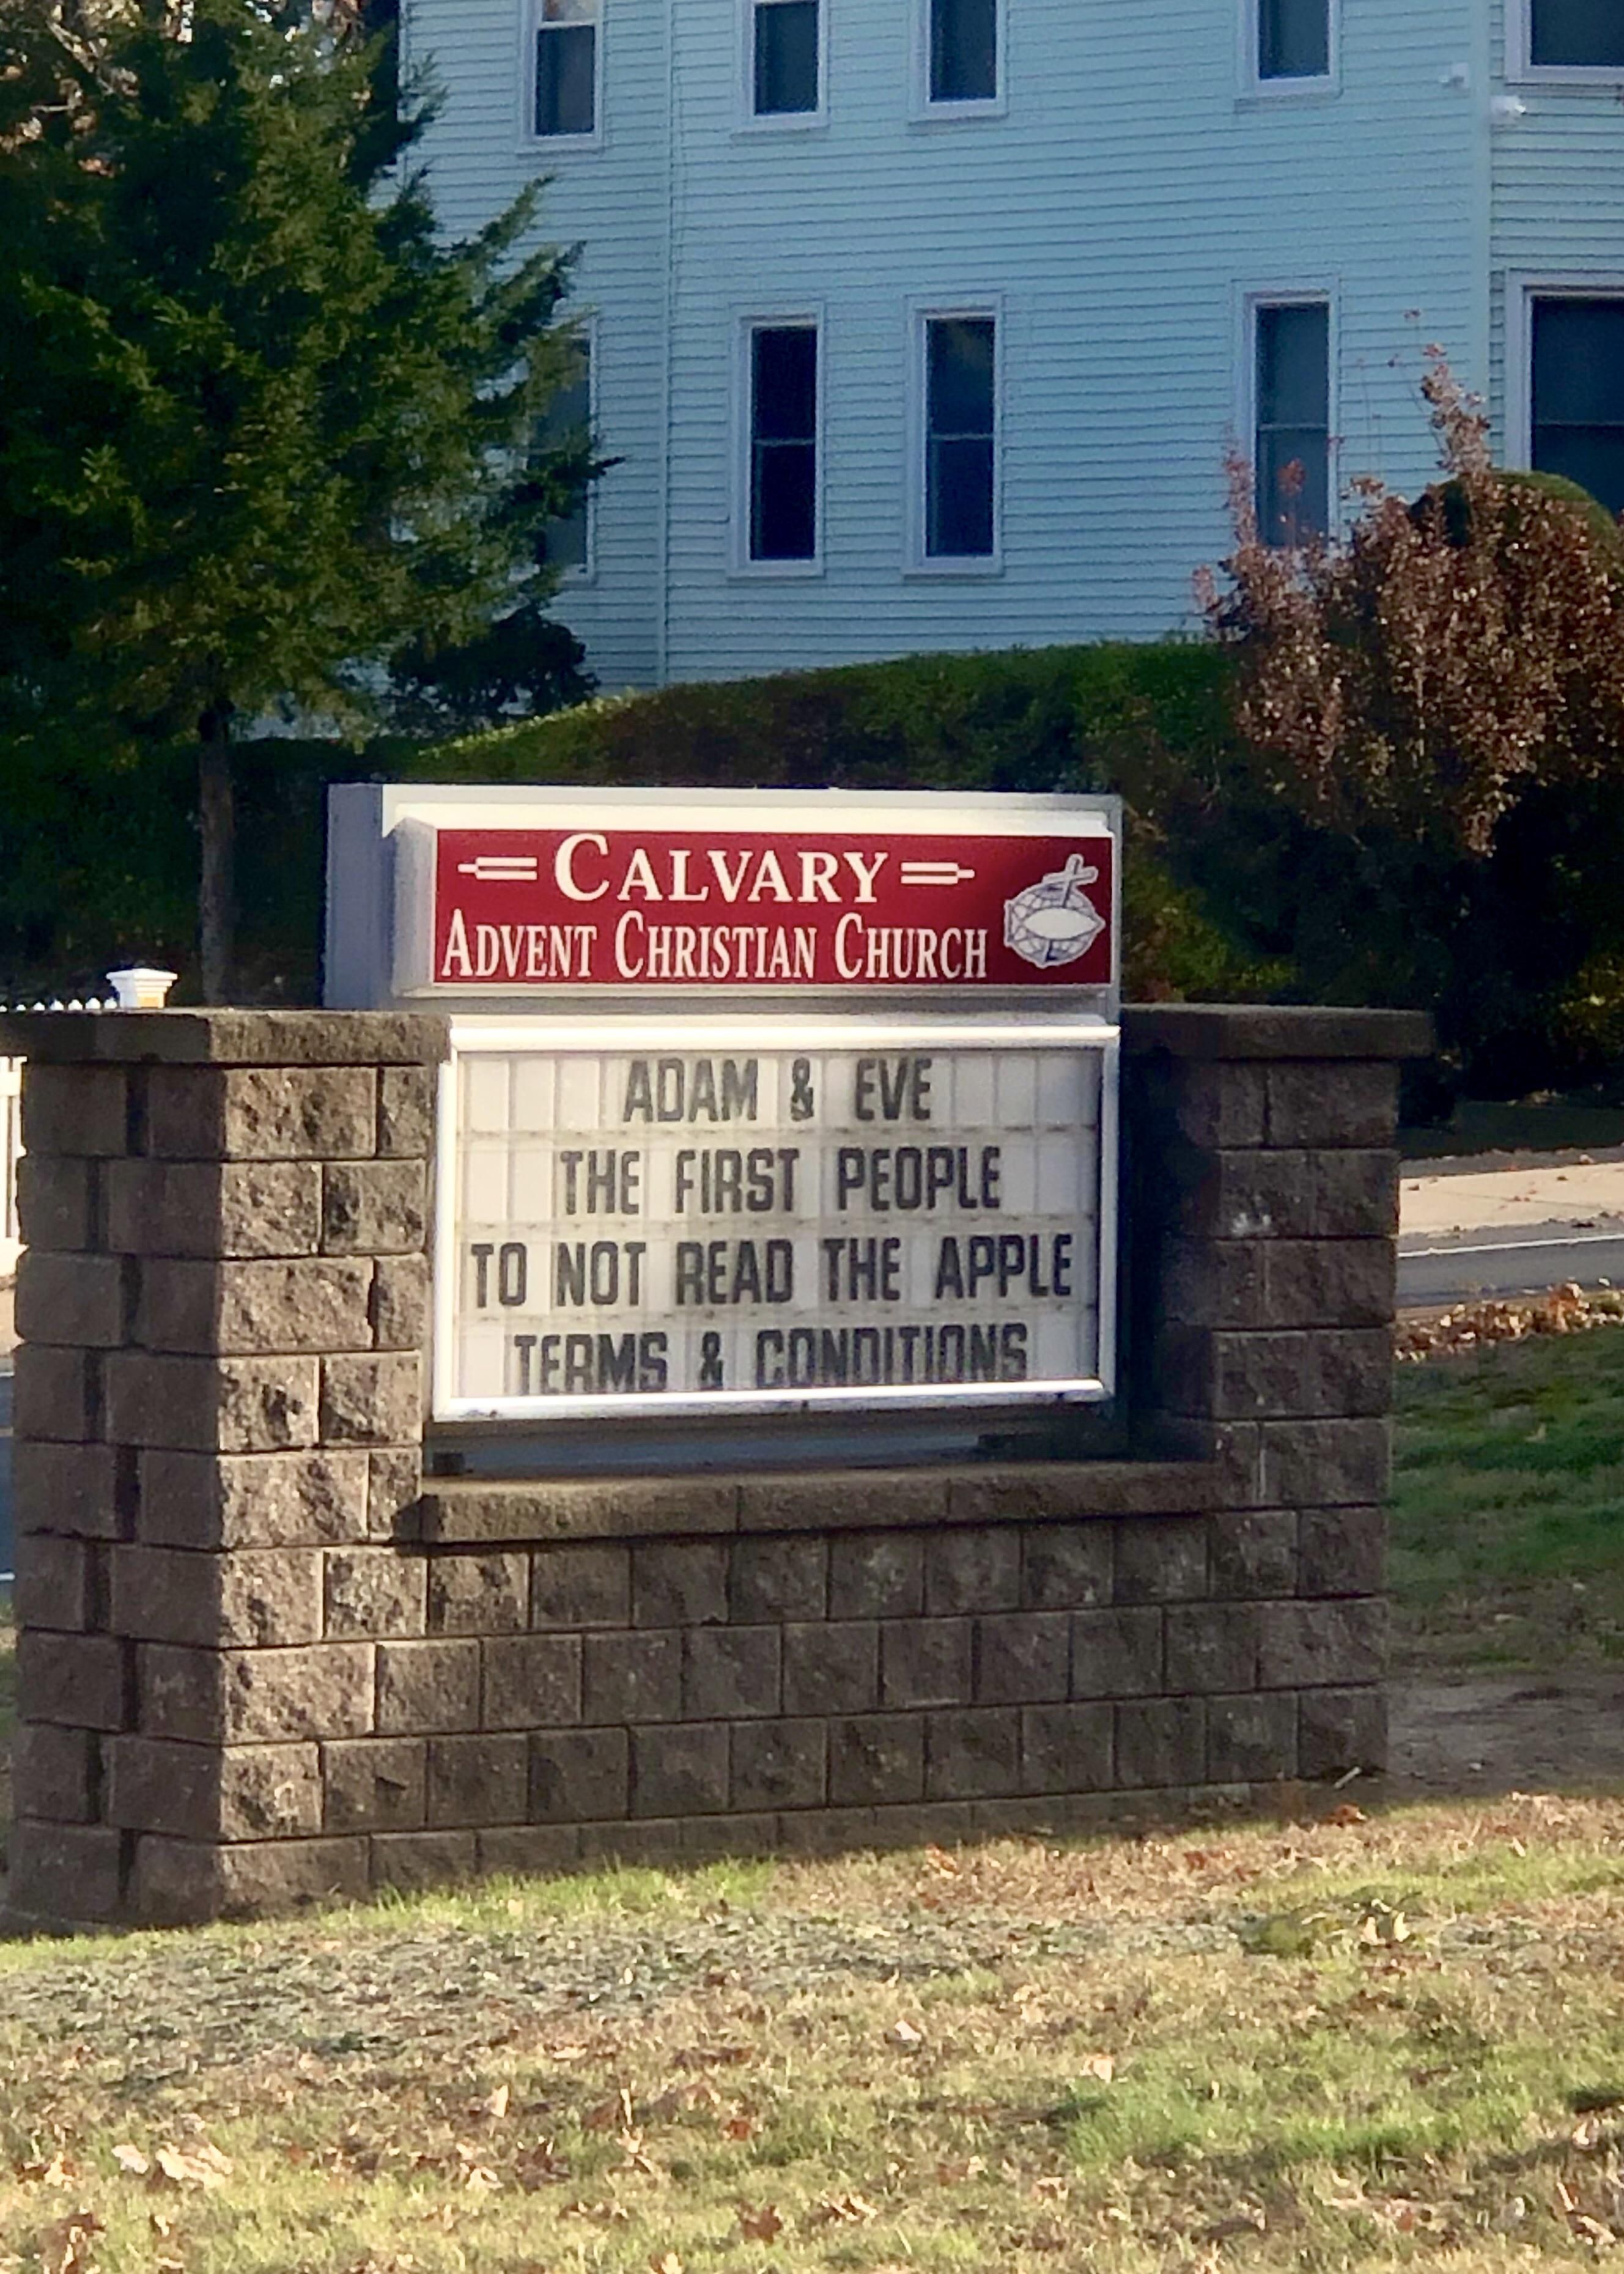 Spotted at a local church.